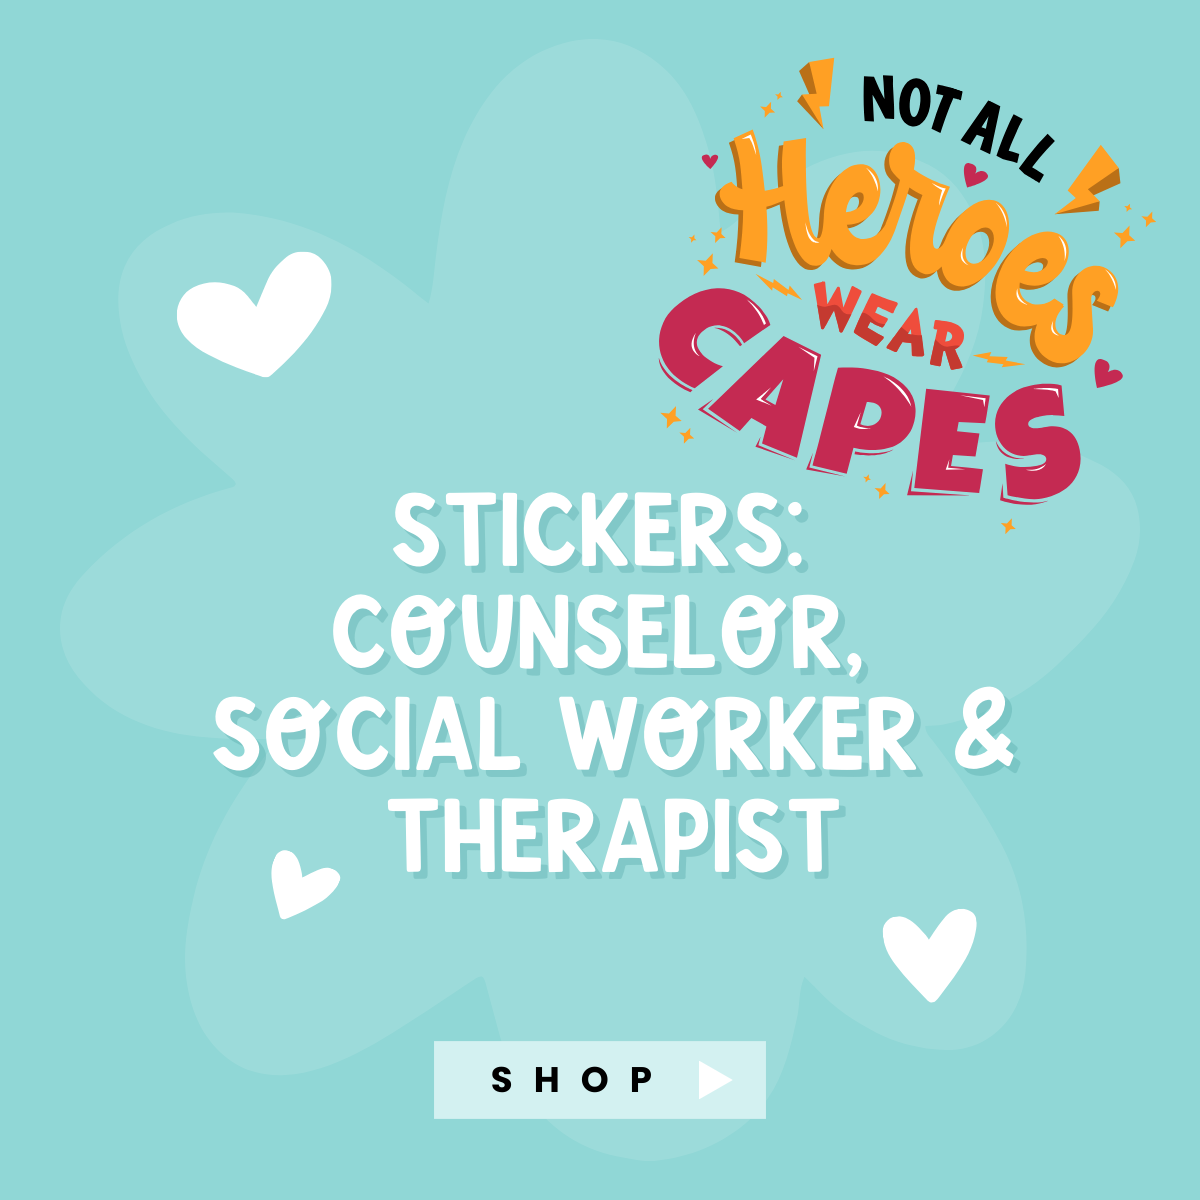 Stickers: Counselors, Social Workers & Therapists